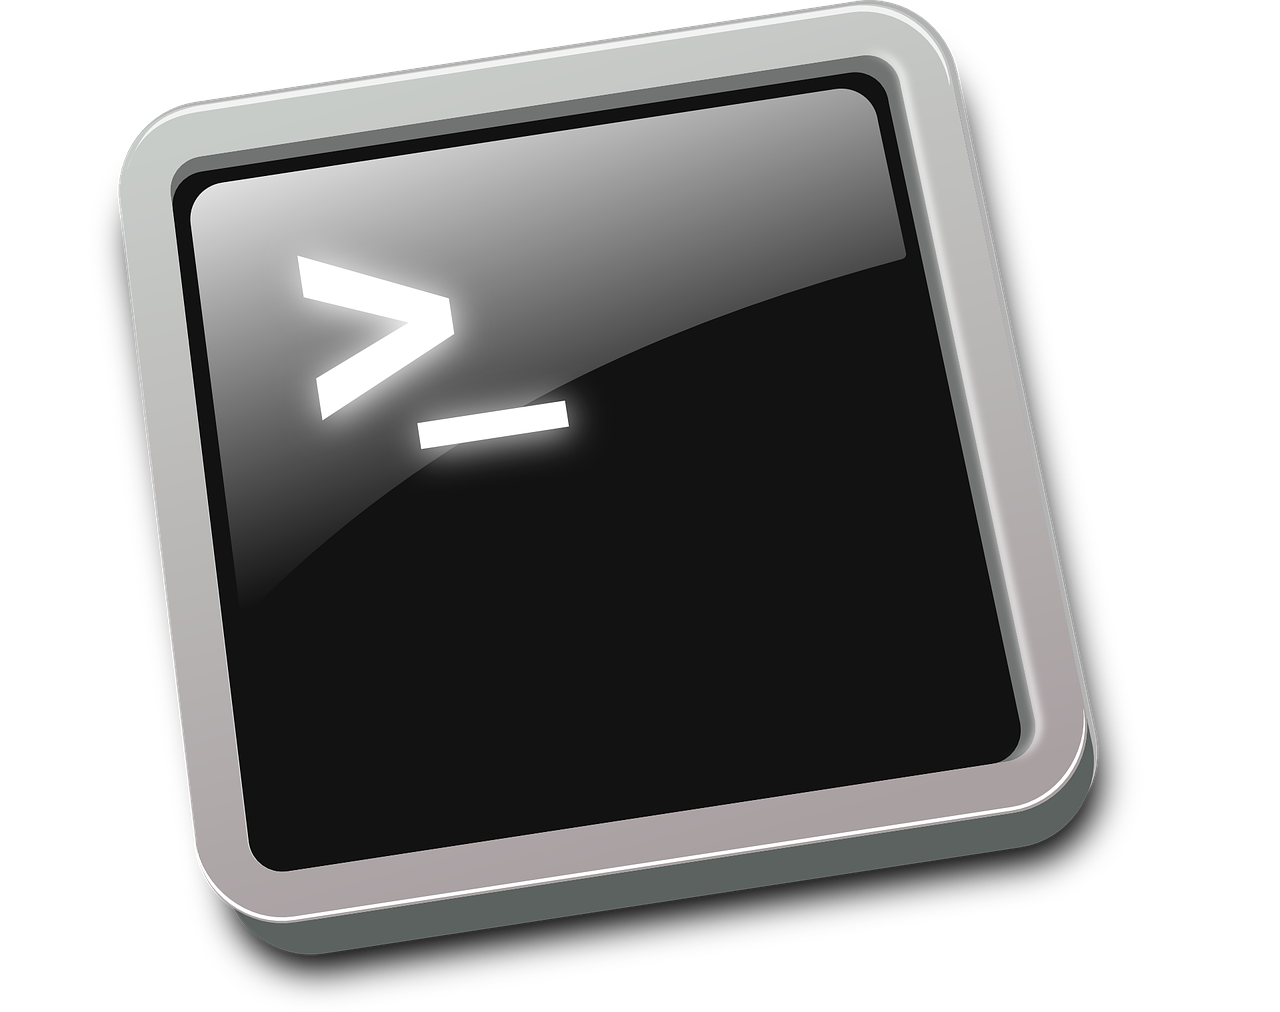 Mac command line tool for unarchiving meaning